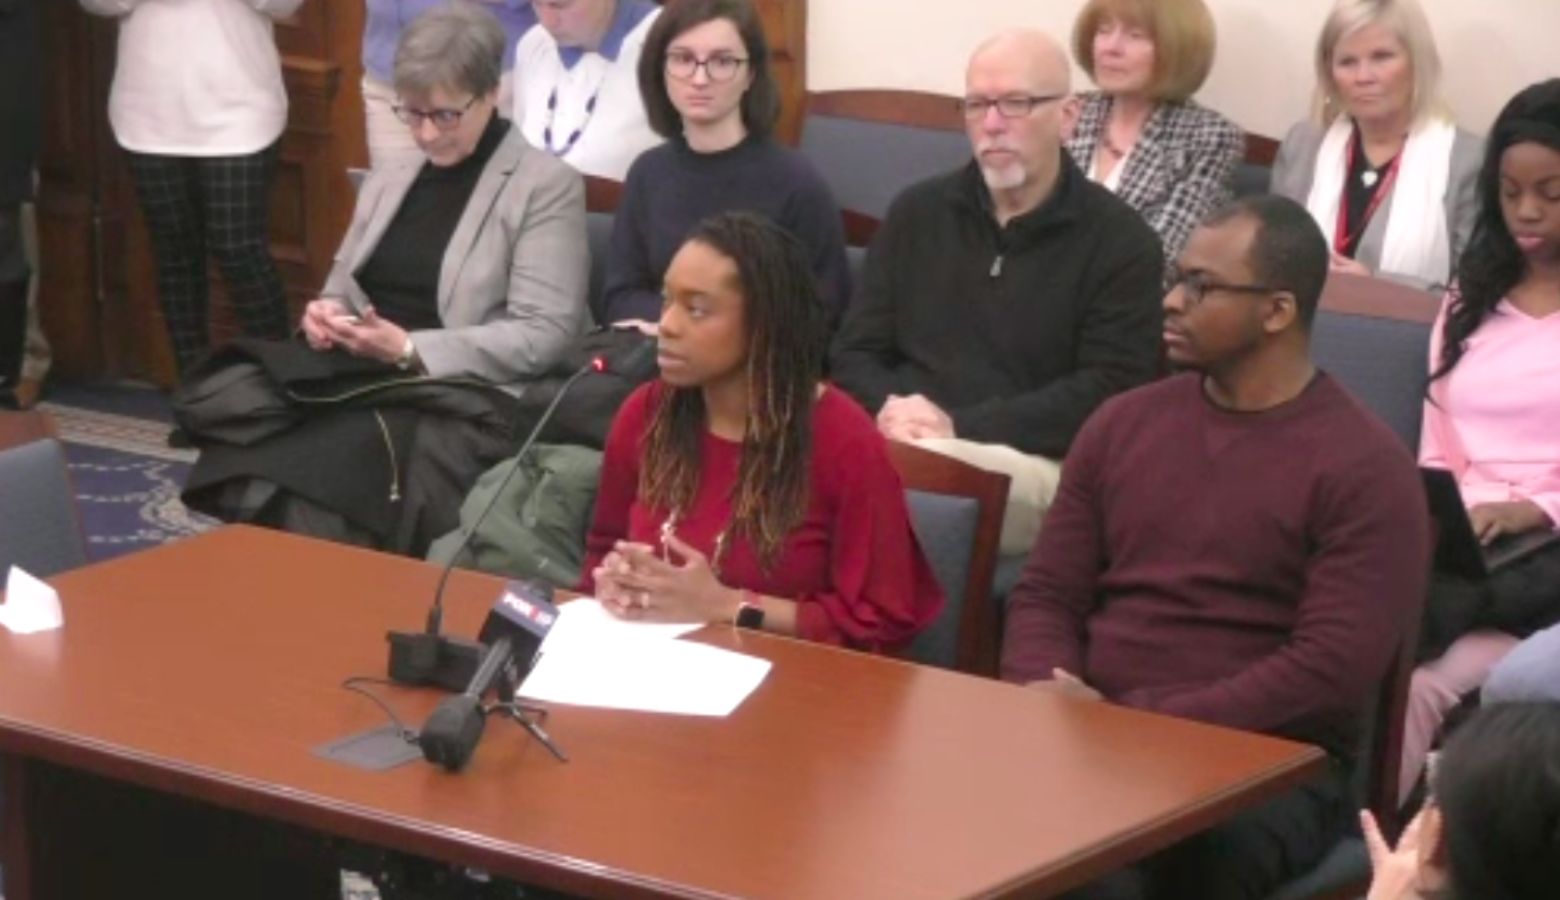 Ashley Phillips testified in support of the bill in front of the Senate committee on Family and Children Services. (Courtesy Indiana General Assembly)